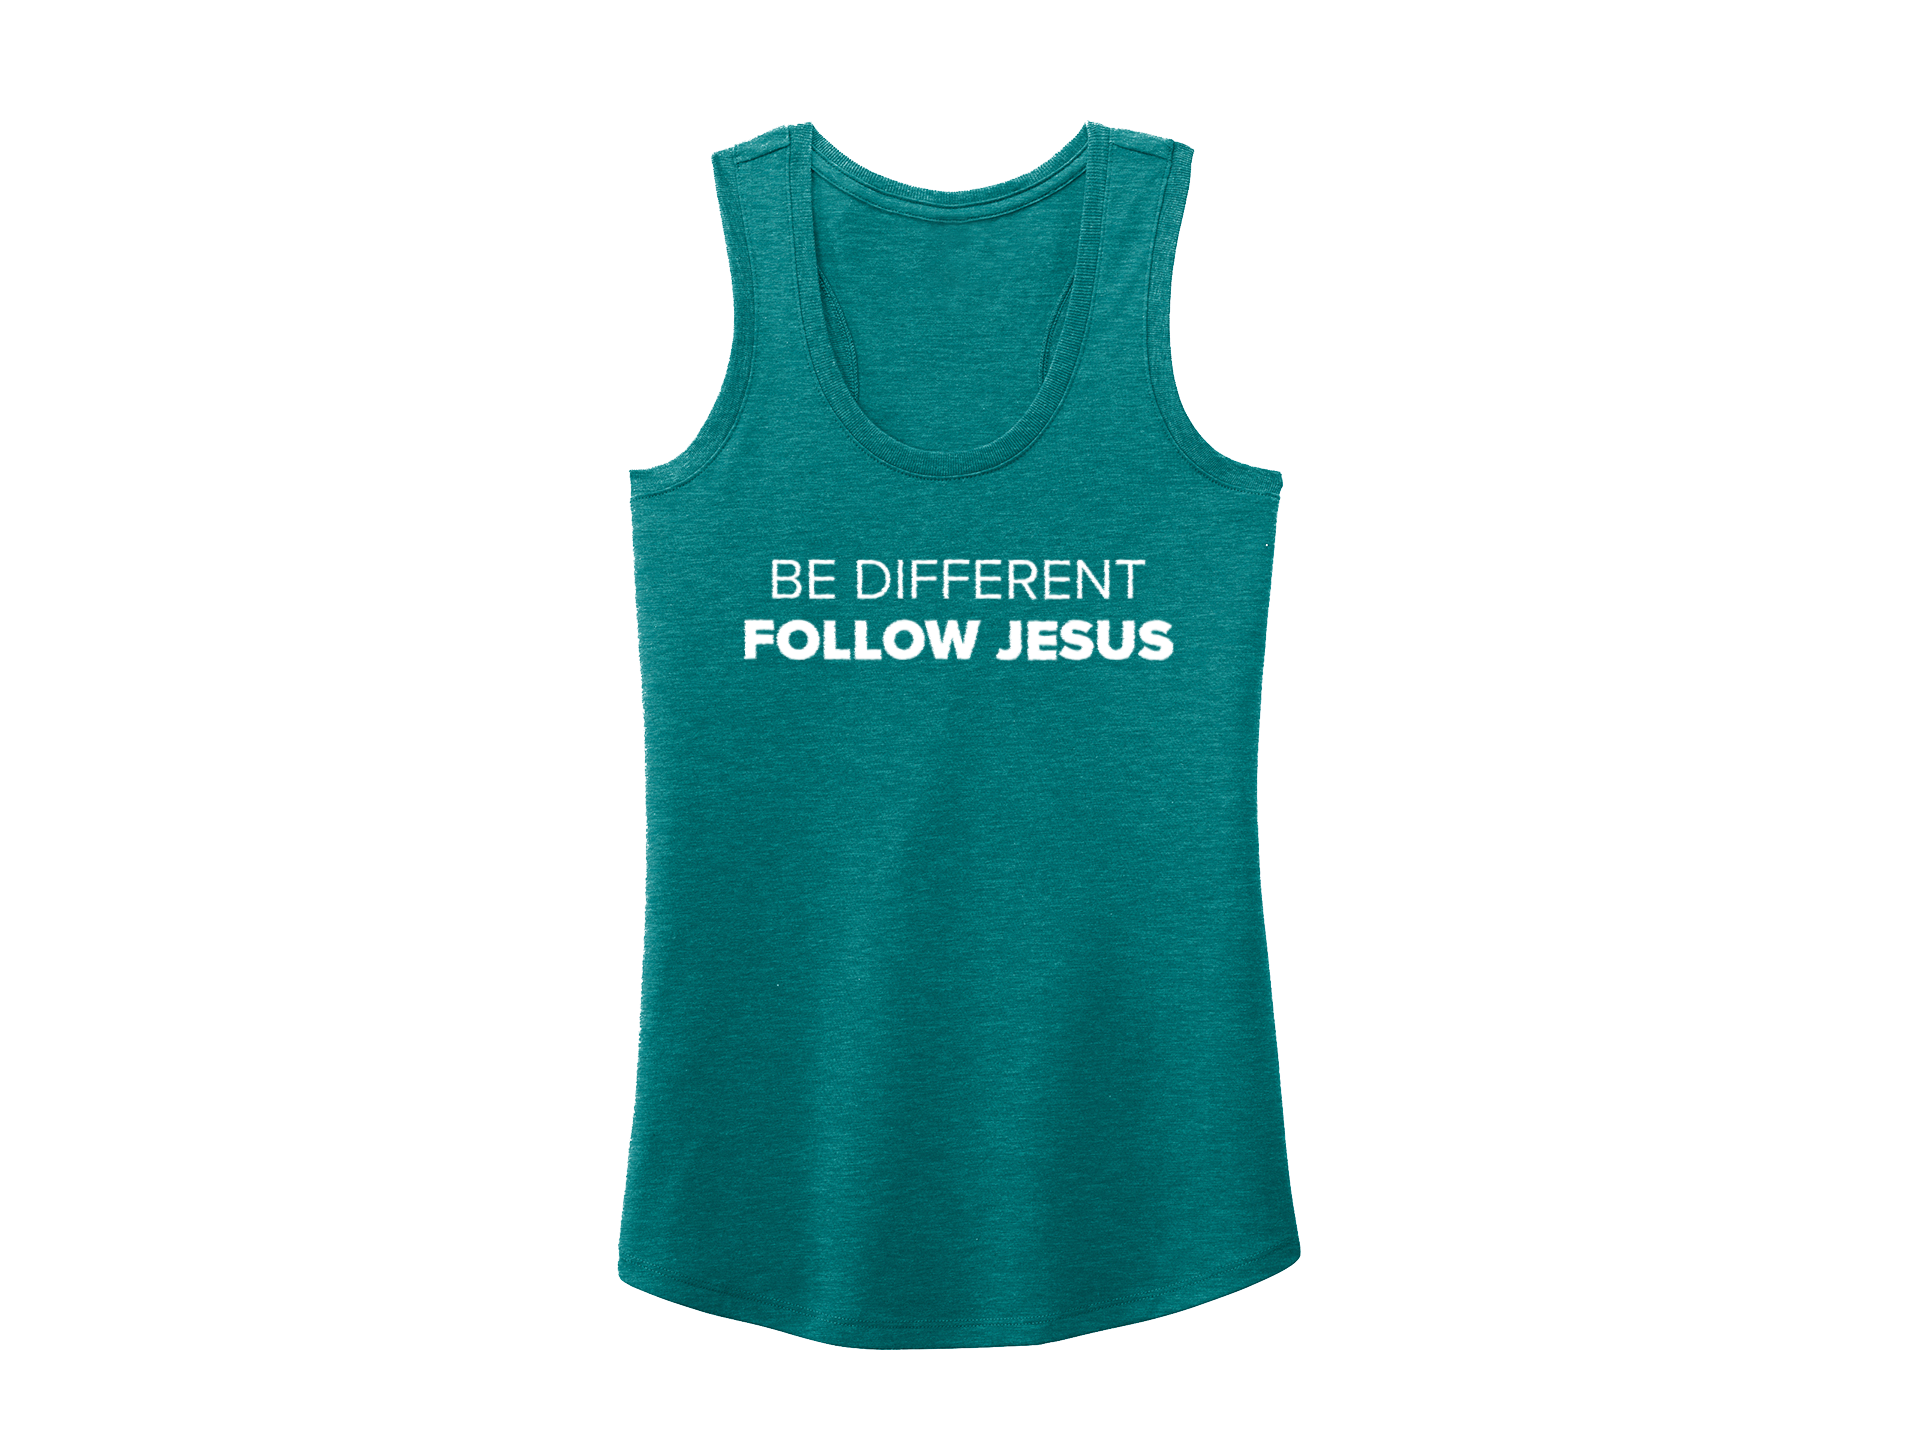 BE DIFFERENT FOLLOW JESUS TANK GREEN - CHRISTIAN CLOTHING